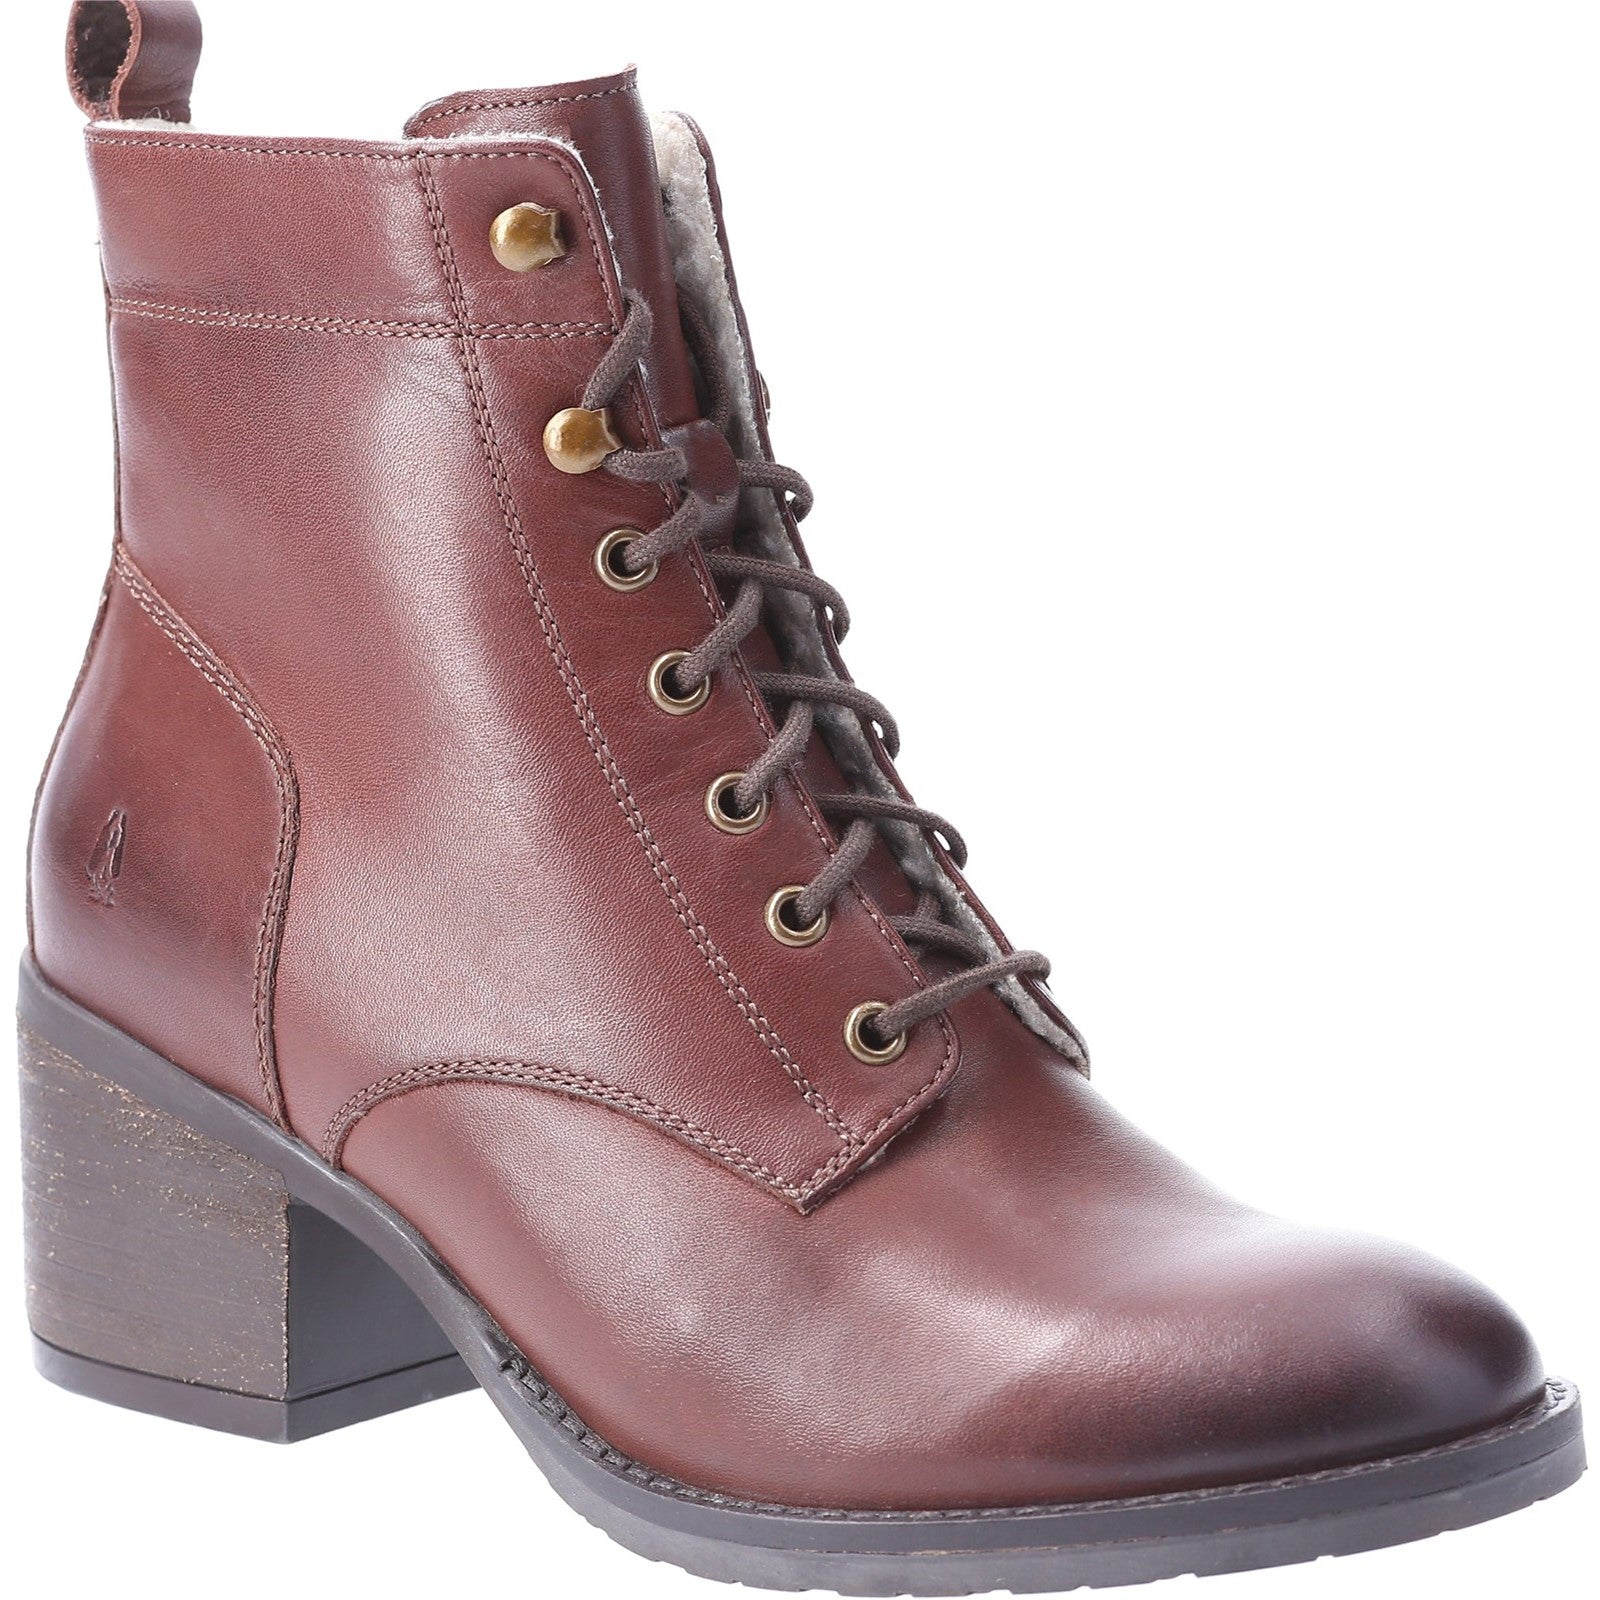 Ladies Ankle Boots Brown Hush Puppies Harriet Boot